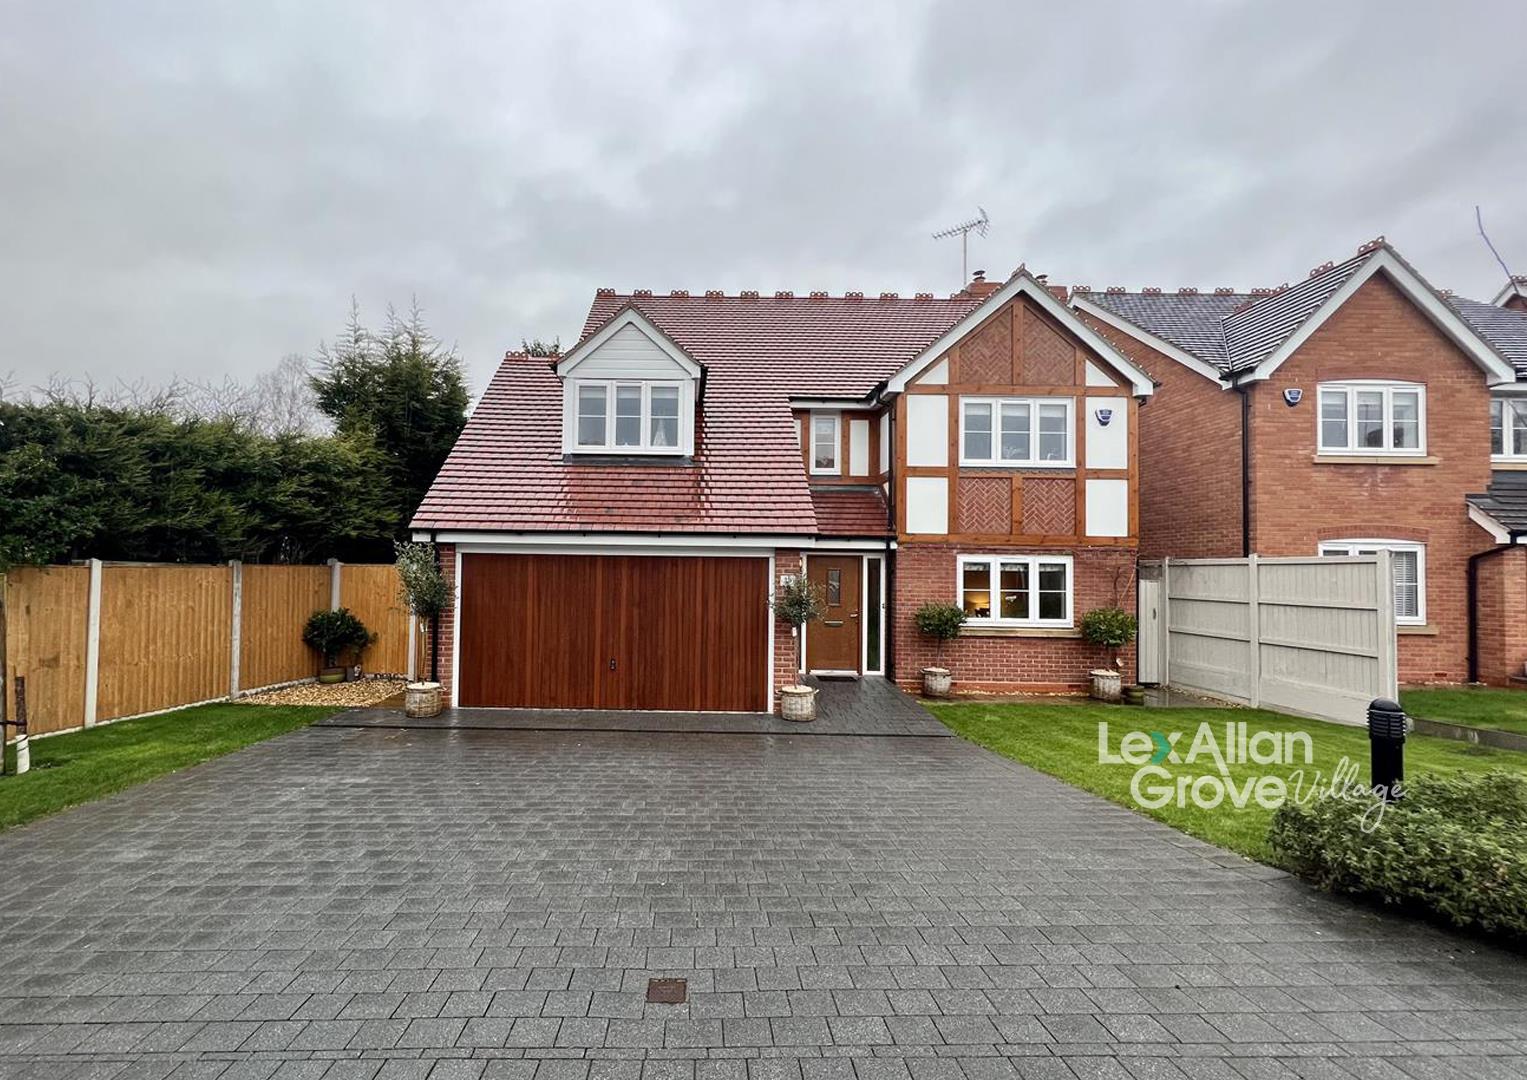 4 bed detached house for sale in Pearmain Gardens, Stourbridge - Property Image 1